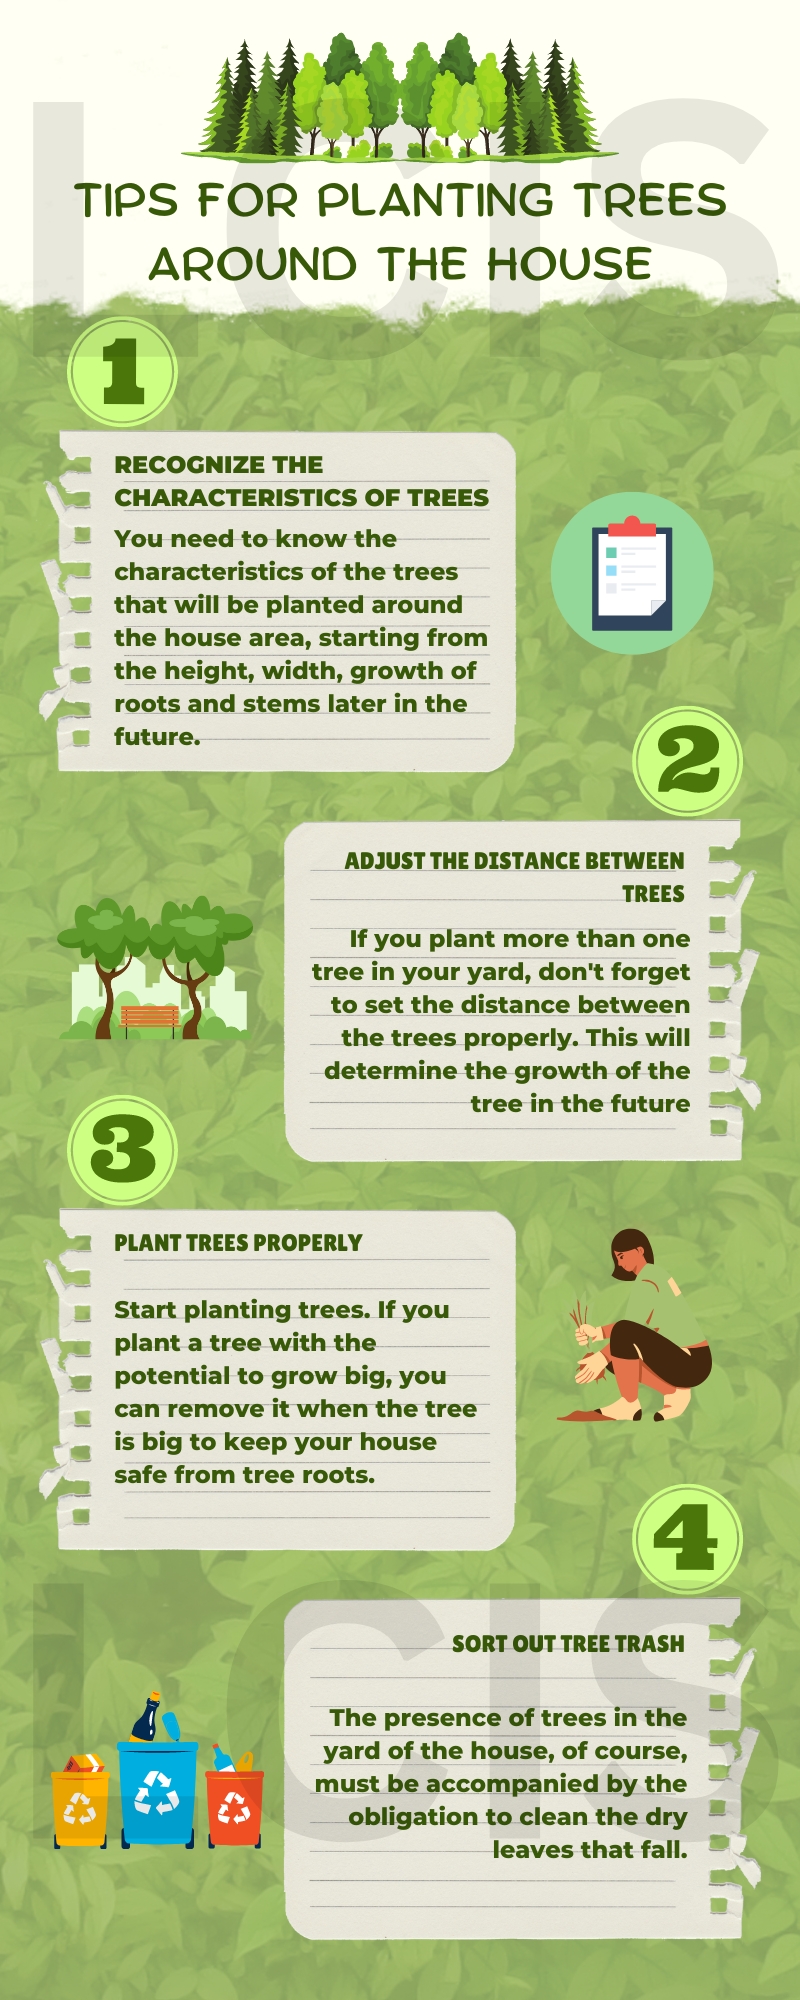 Tips for planting tree around the house